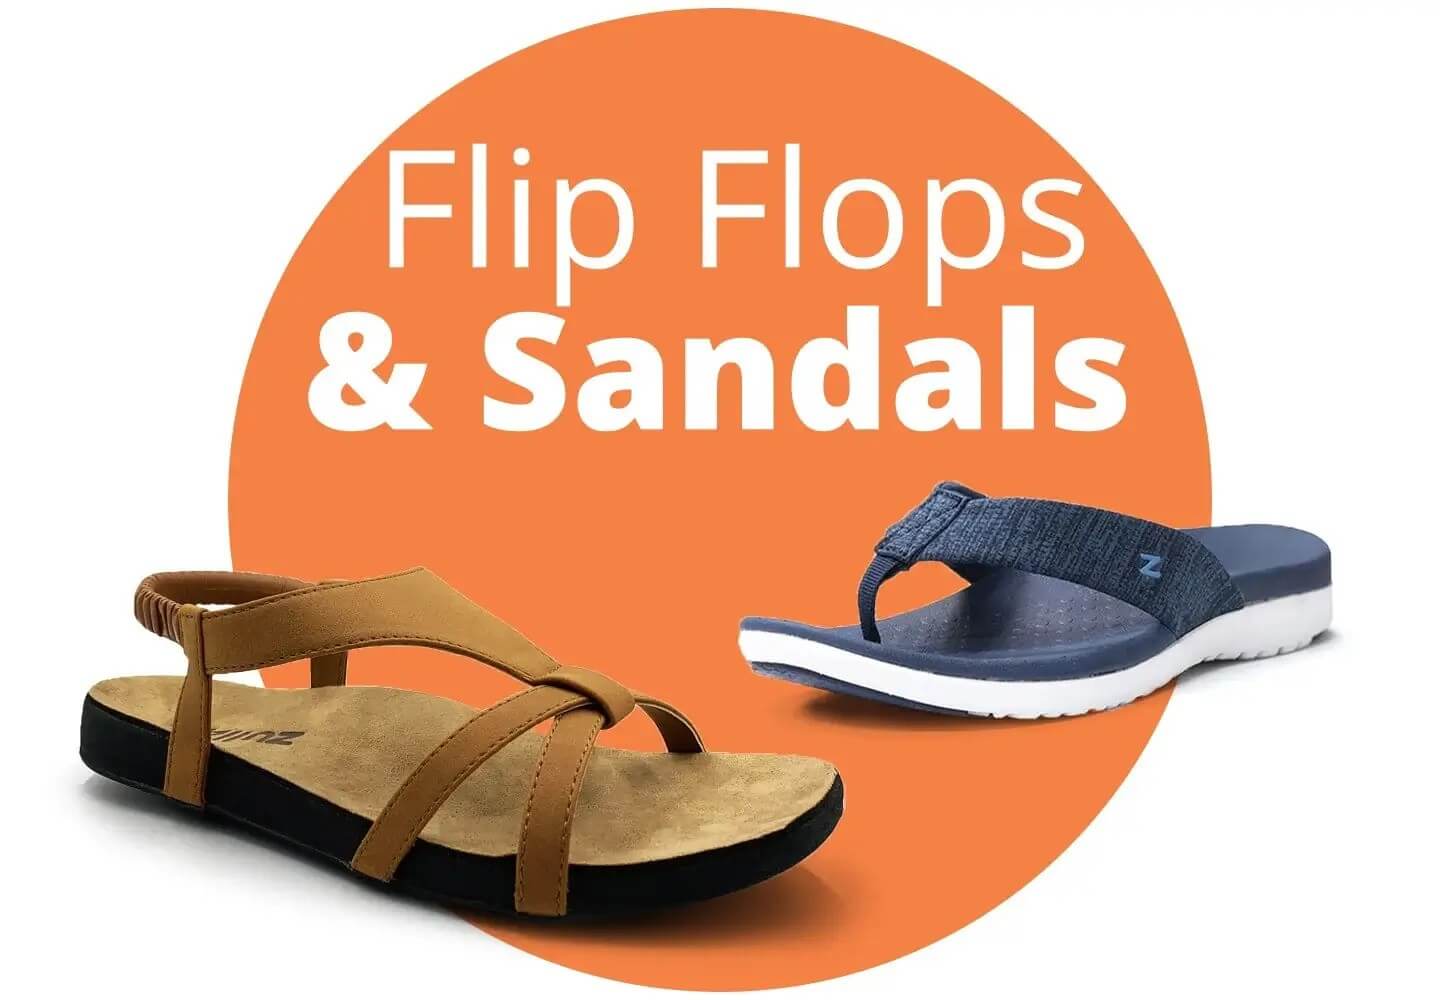 Arch support flip flops and sandals